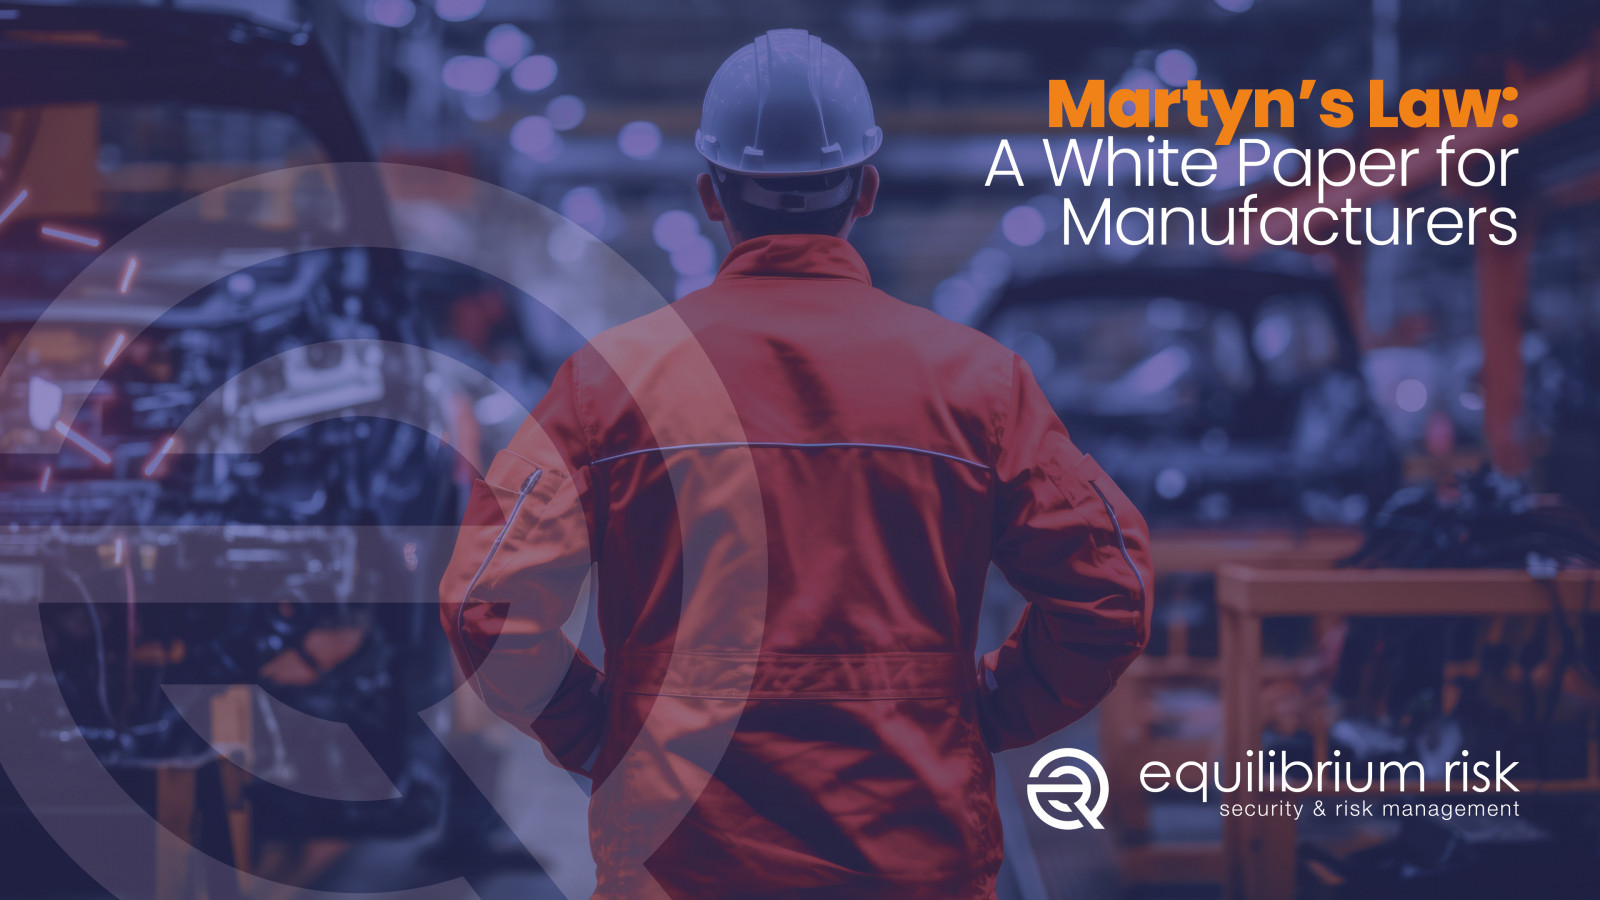 Equilibrium Risk Publishes White Paper on Martyn's...